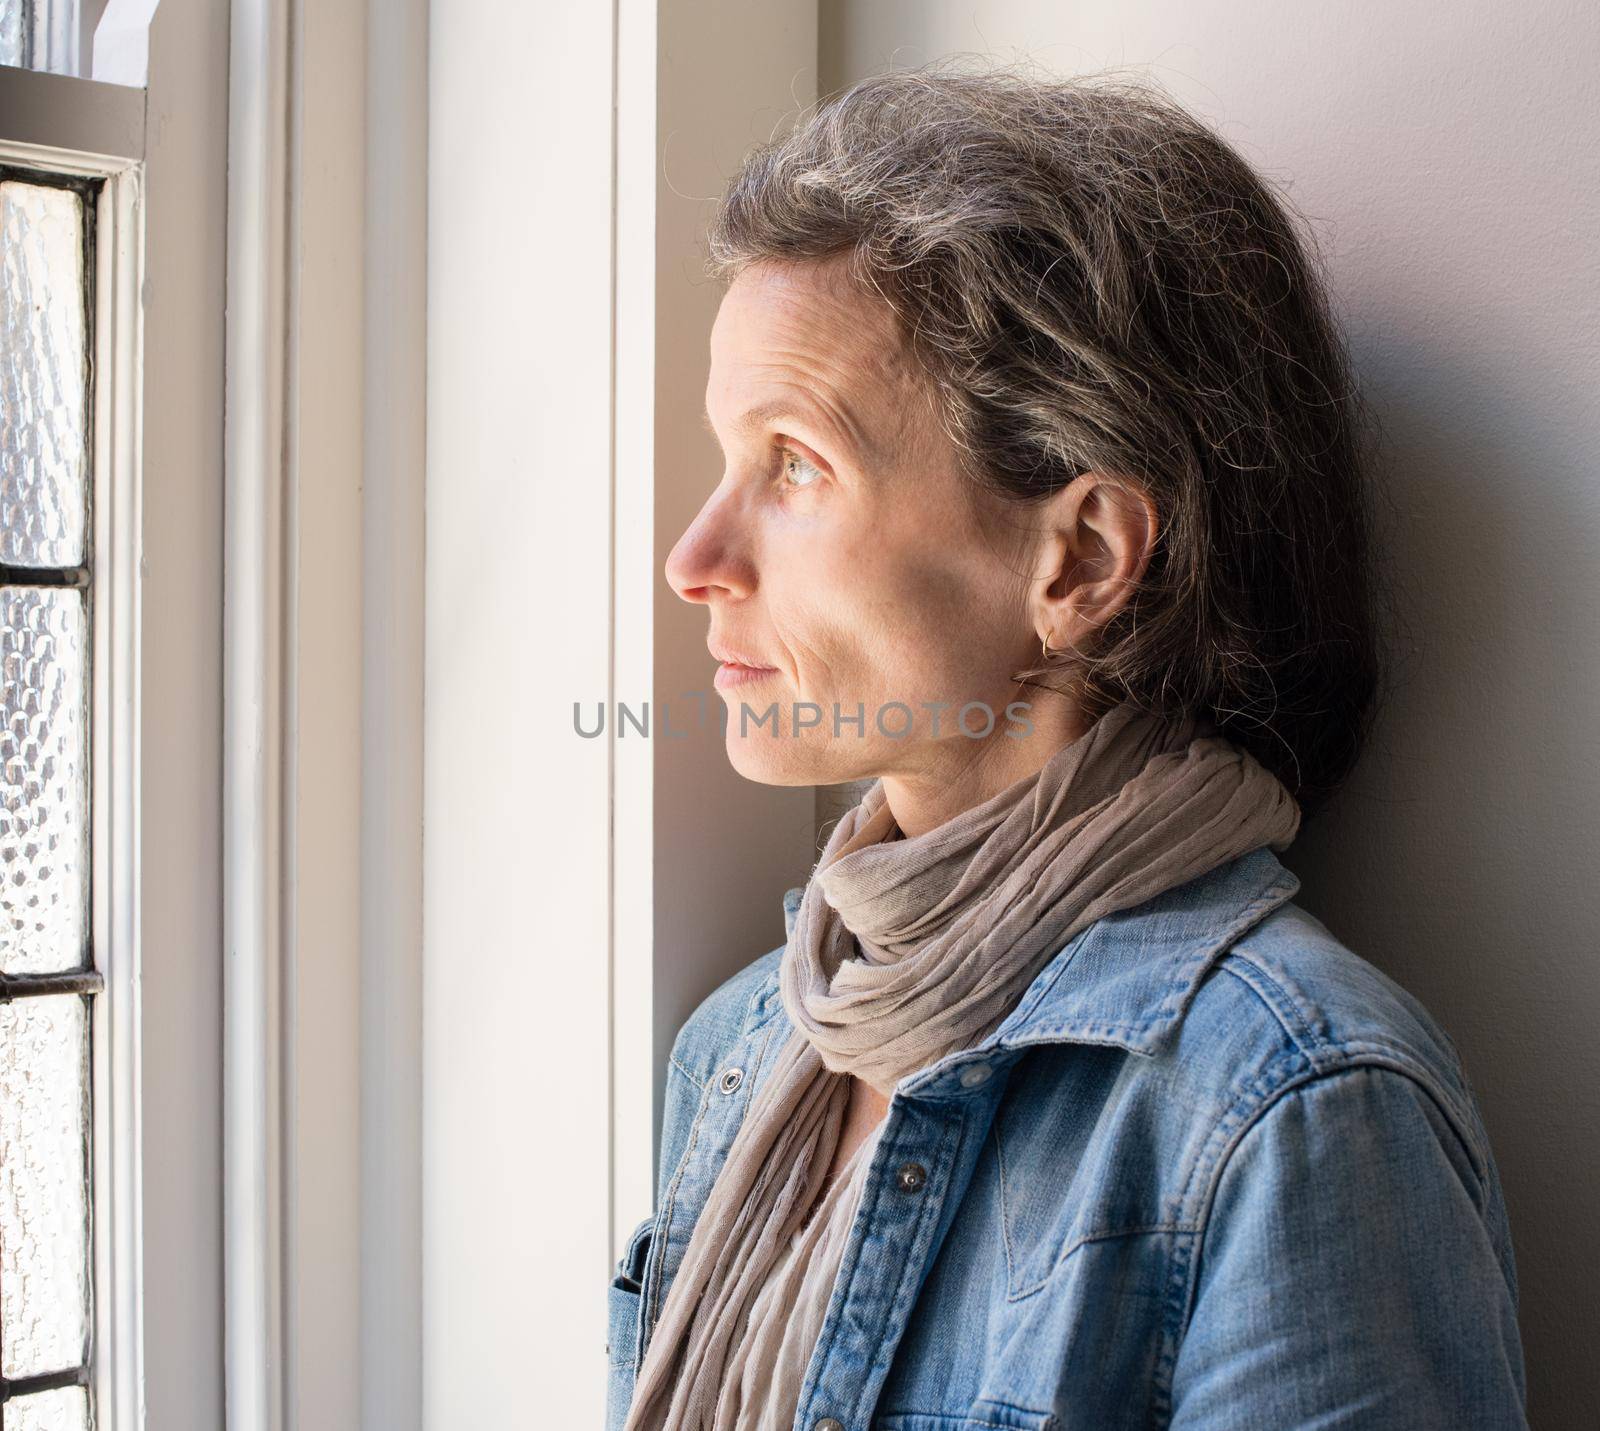 Profile view of middle aged woman with grey hair and scarf and denim shirt next to window looking pensive